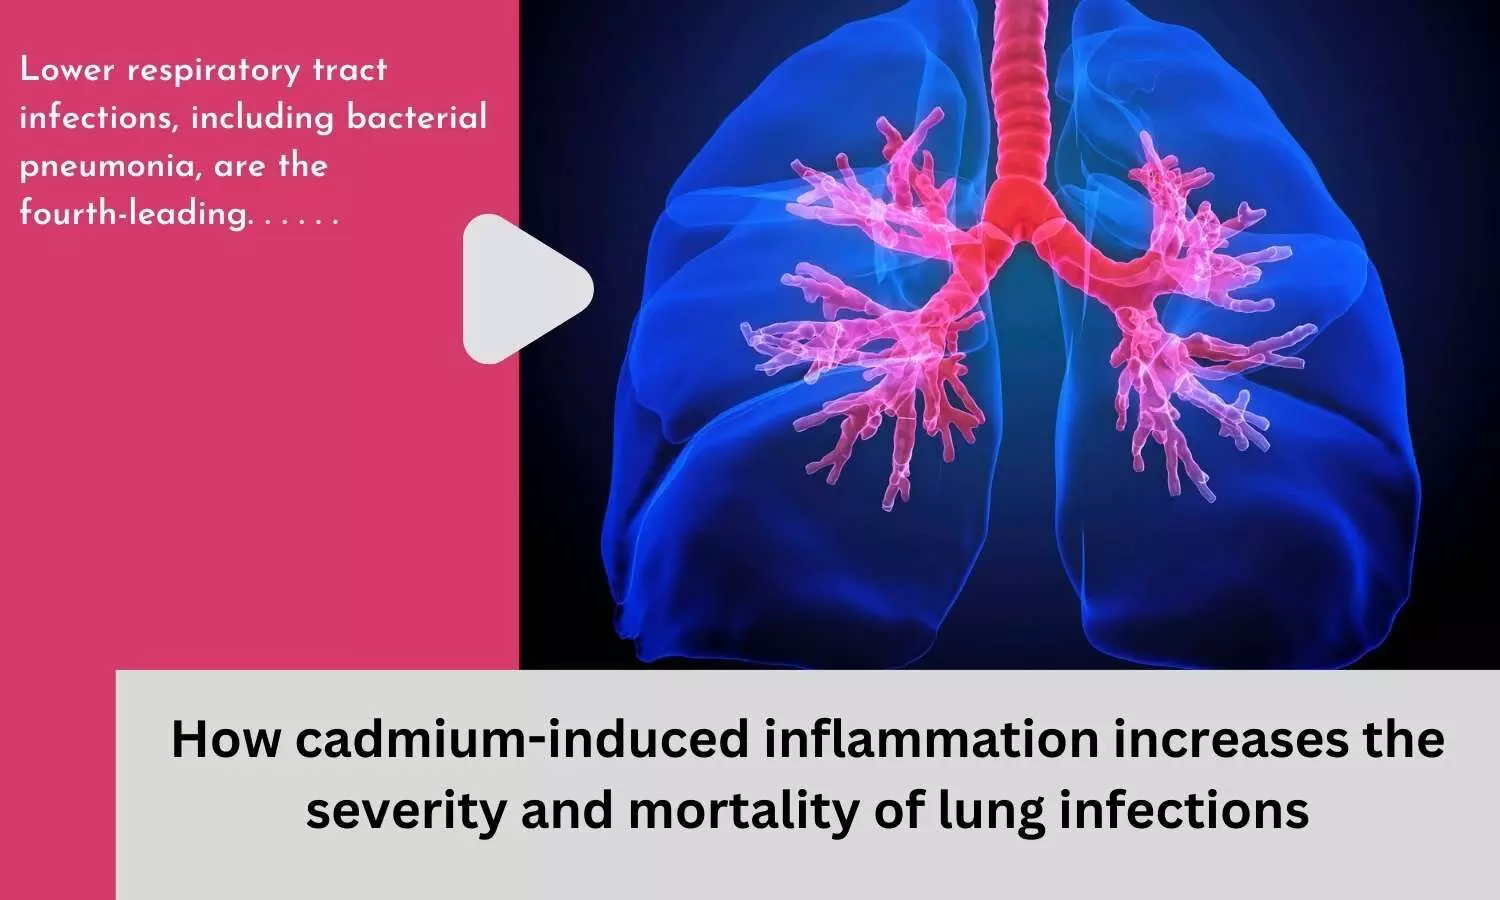 How cadmium-induced inflammation increases the severity and mortality of lung infections